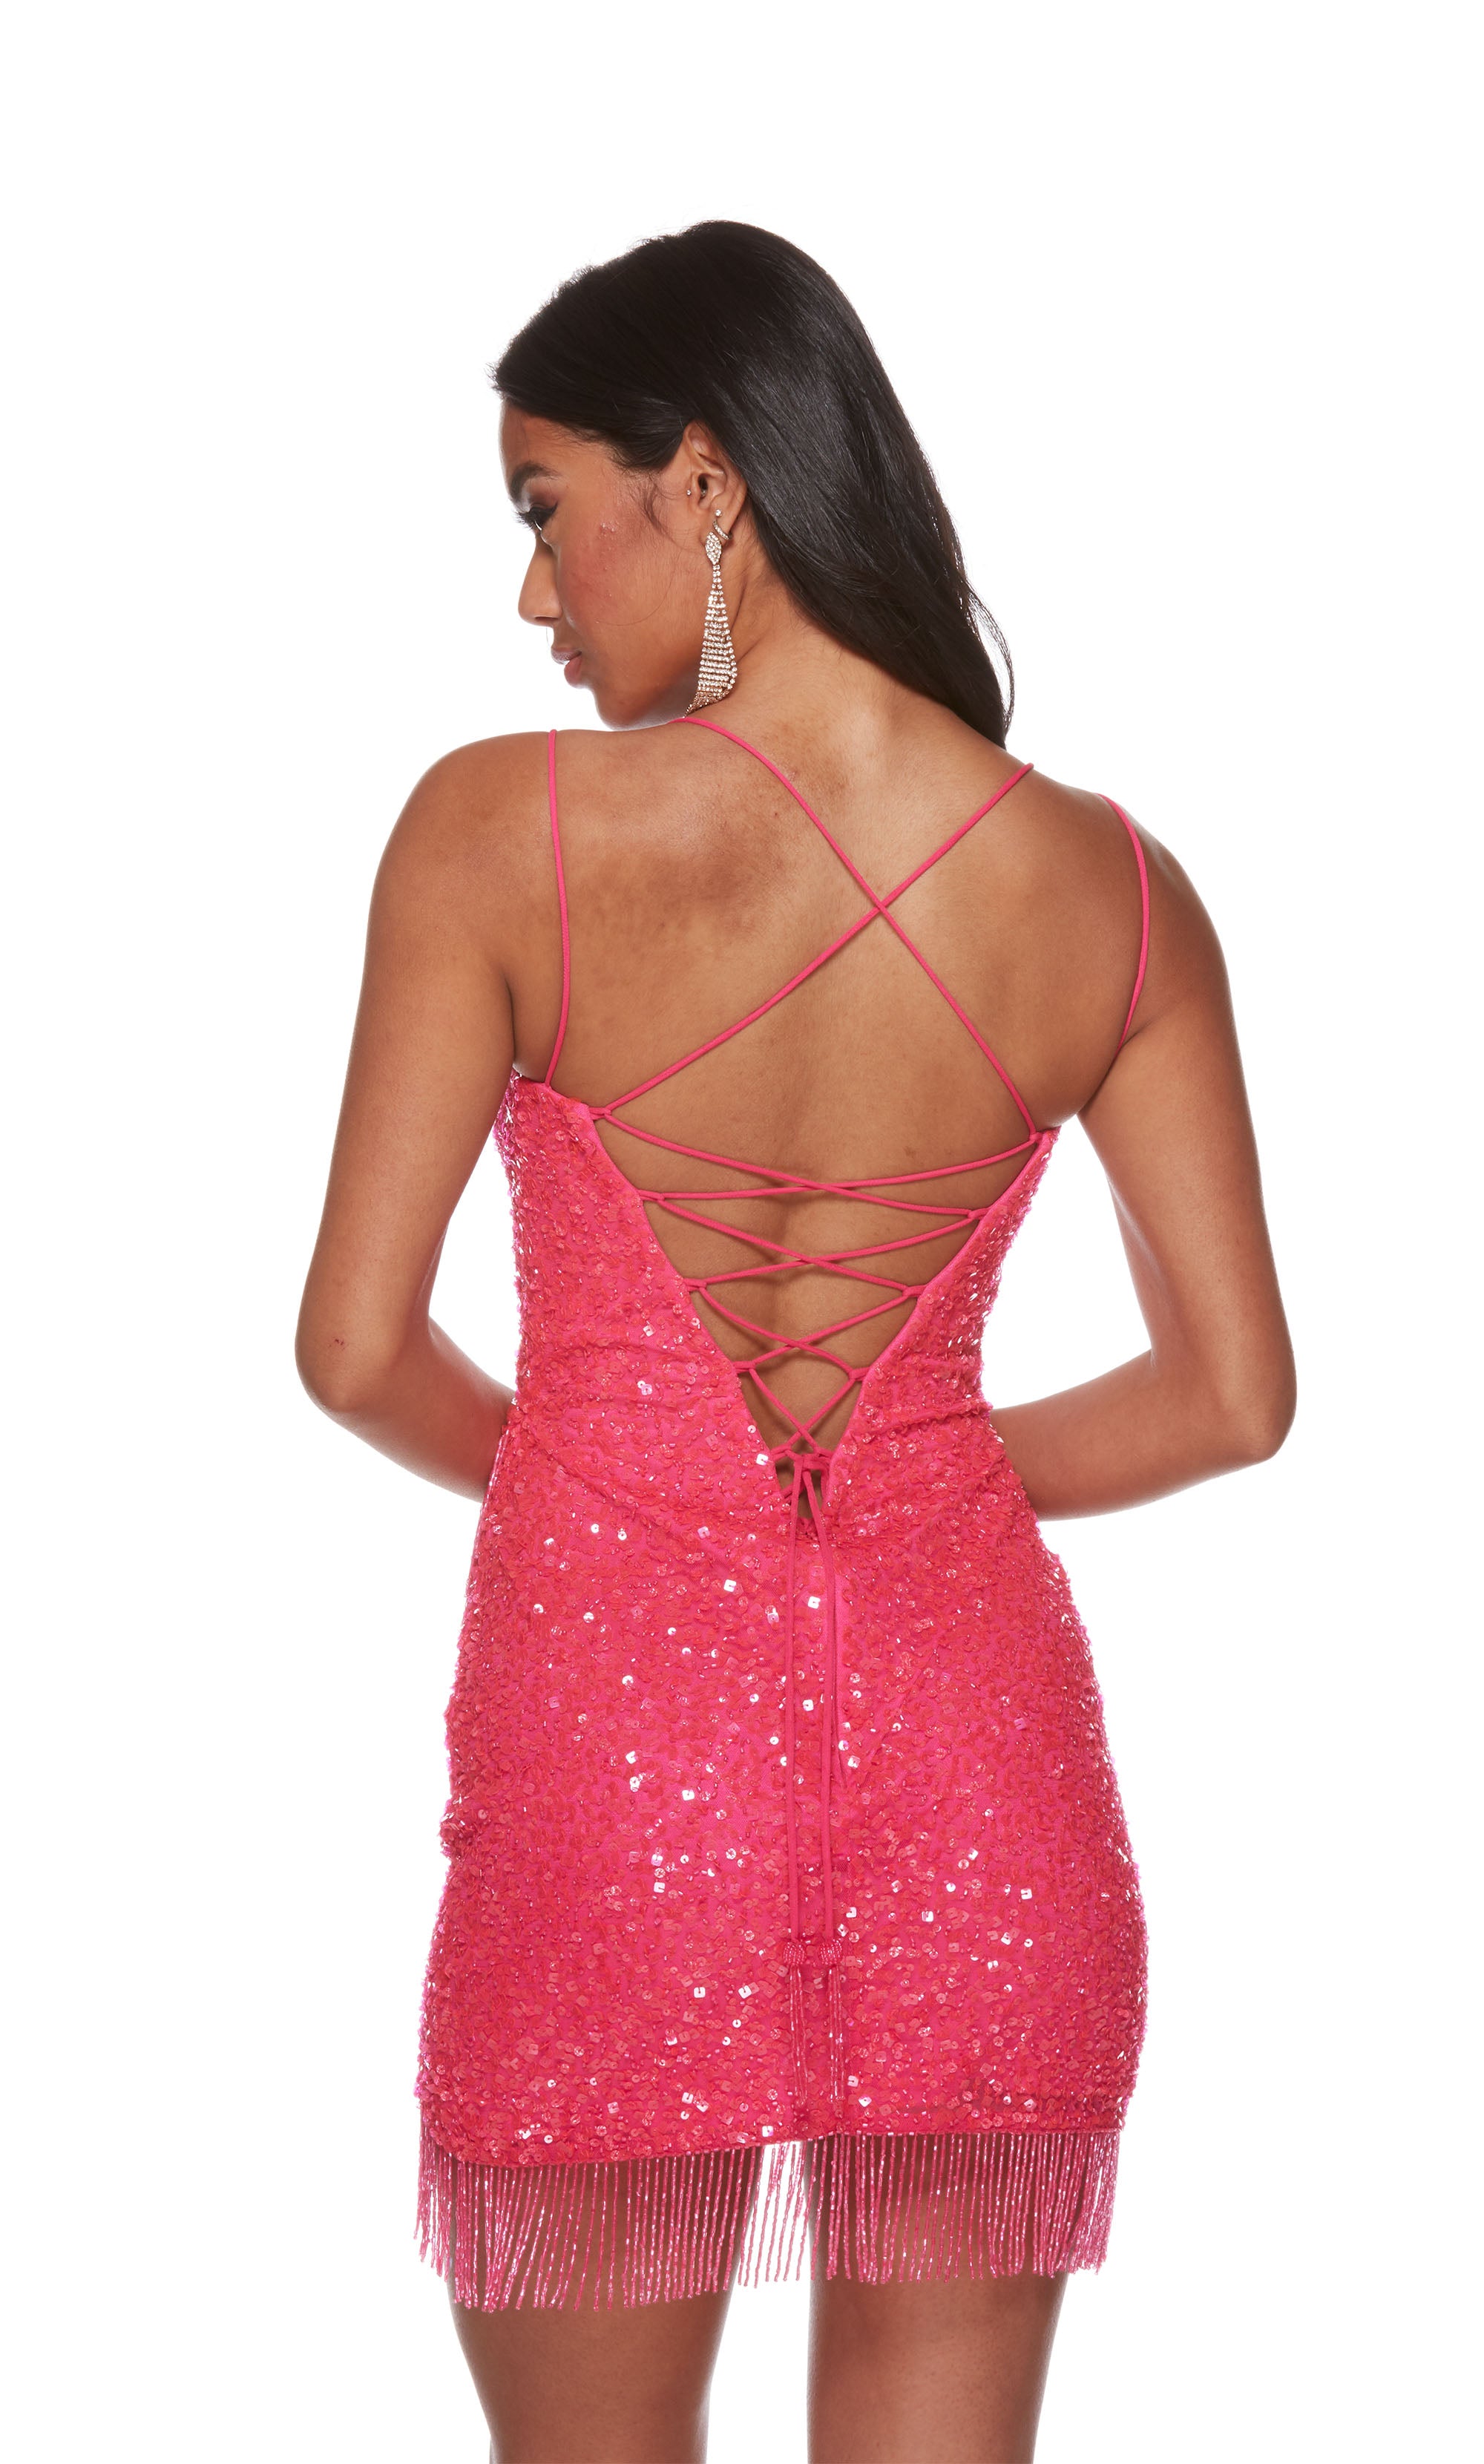 A glamorous electric fuchsia short formal dress dress with a straight across neckline, and dual thin spaghetti straps. Sparkly sequins and a  fringed, asymmetrical hem add a playful, flirtatious vibe to the look.